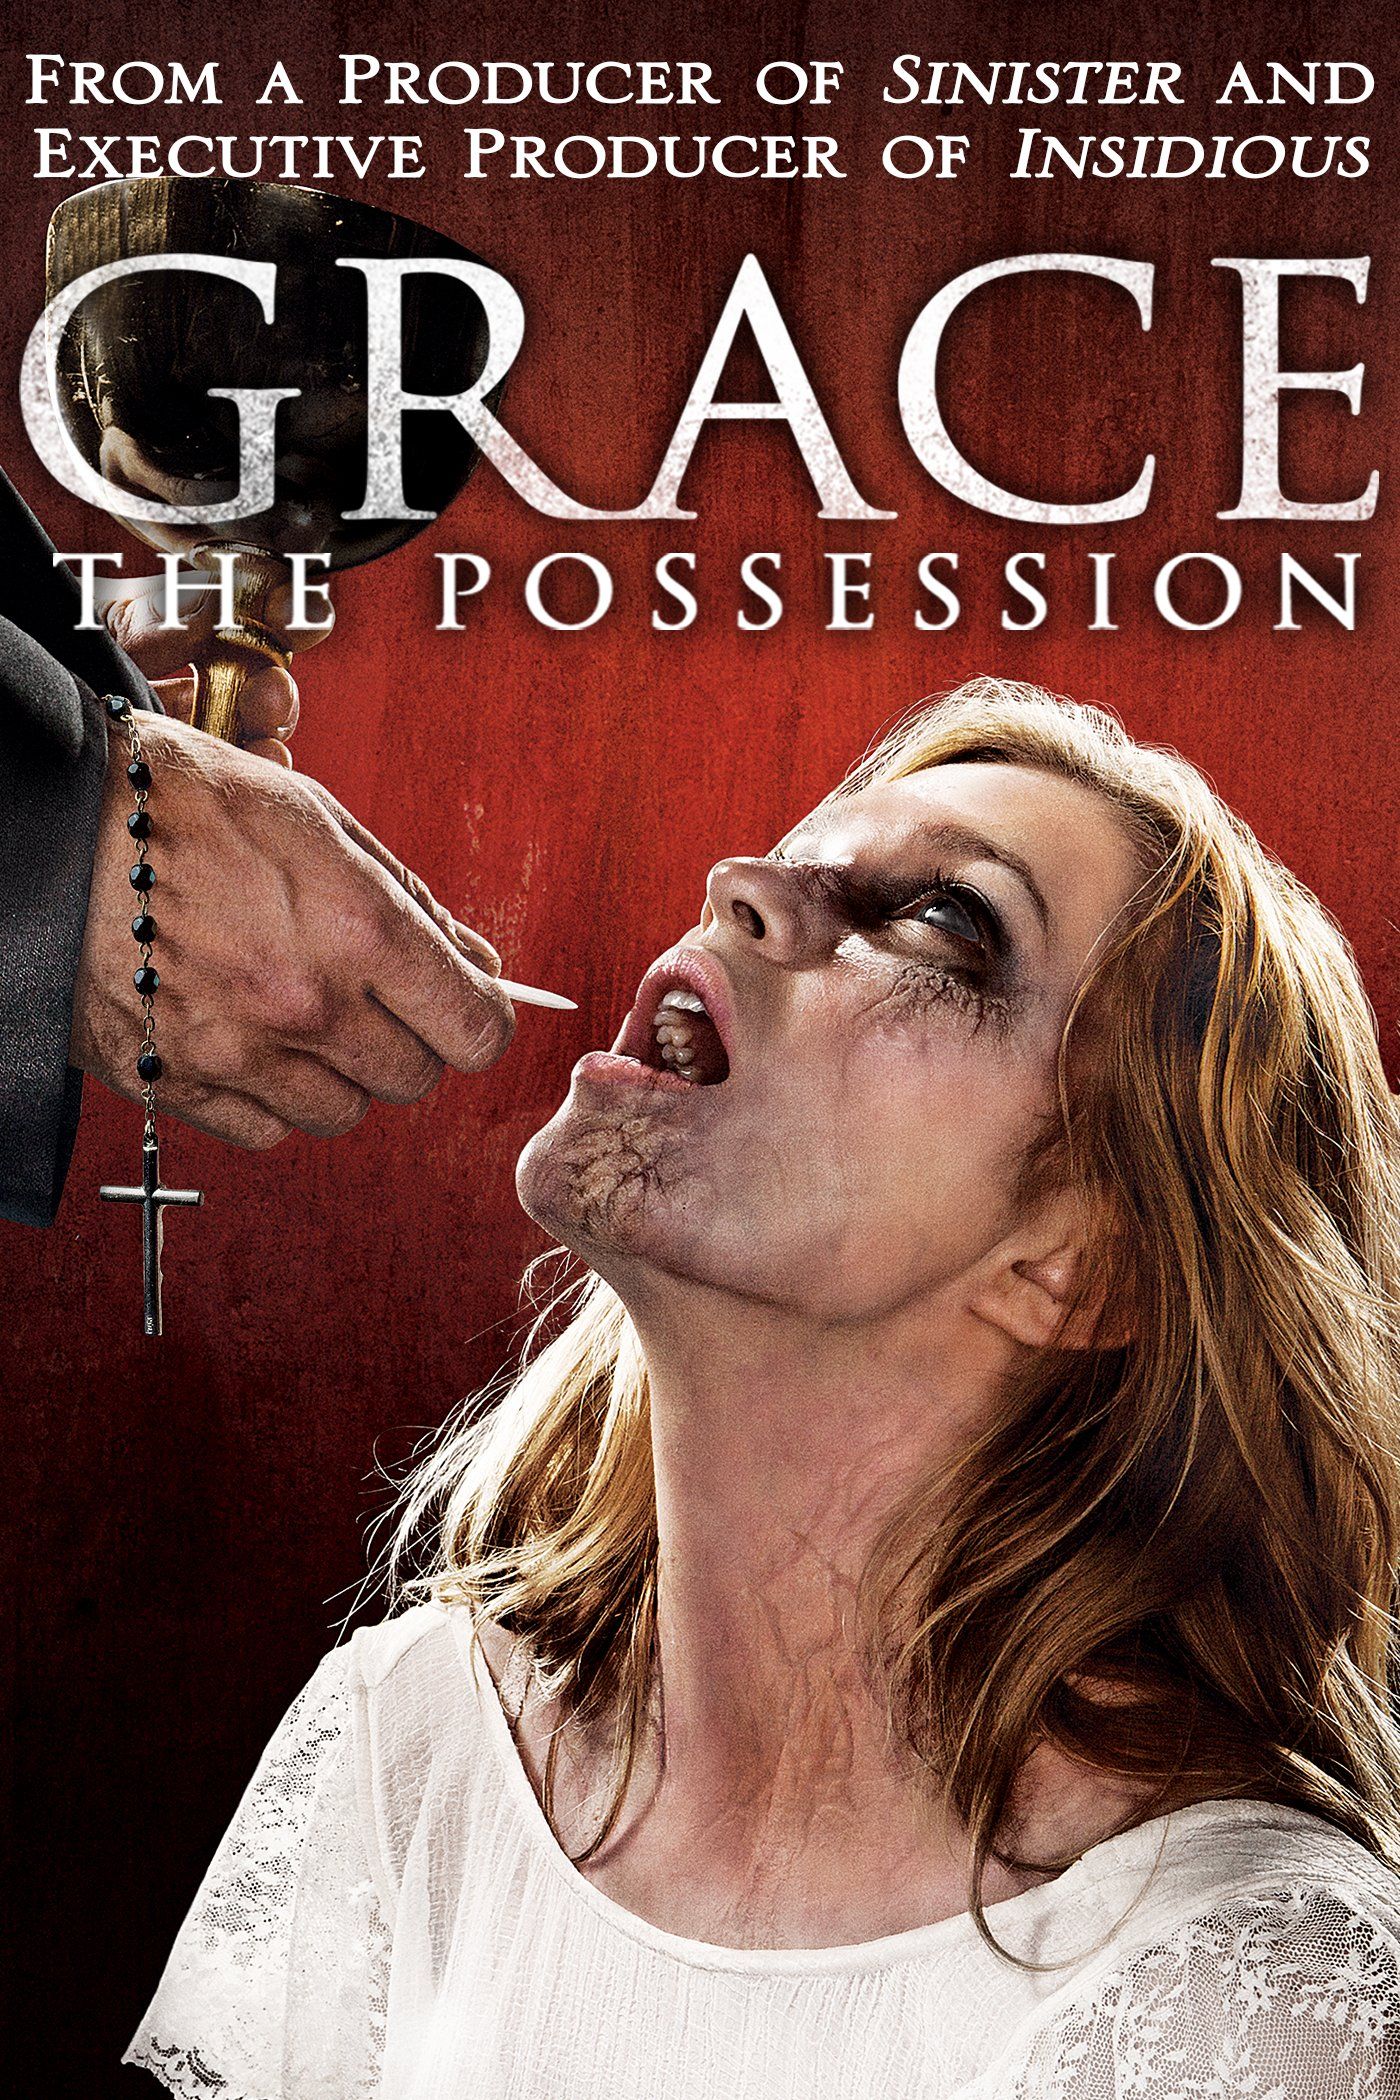 Grace The Possession (2014) Hindi Dubbed Full Movie